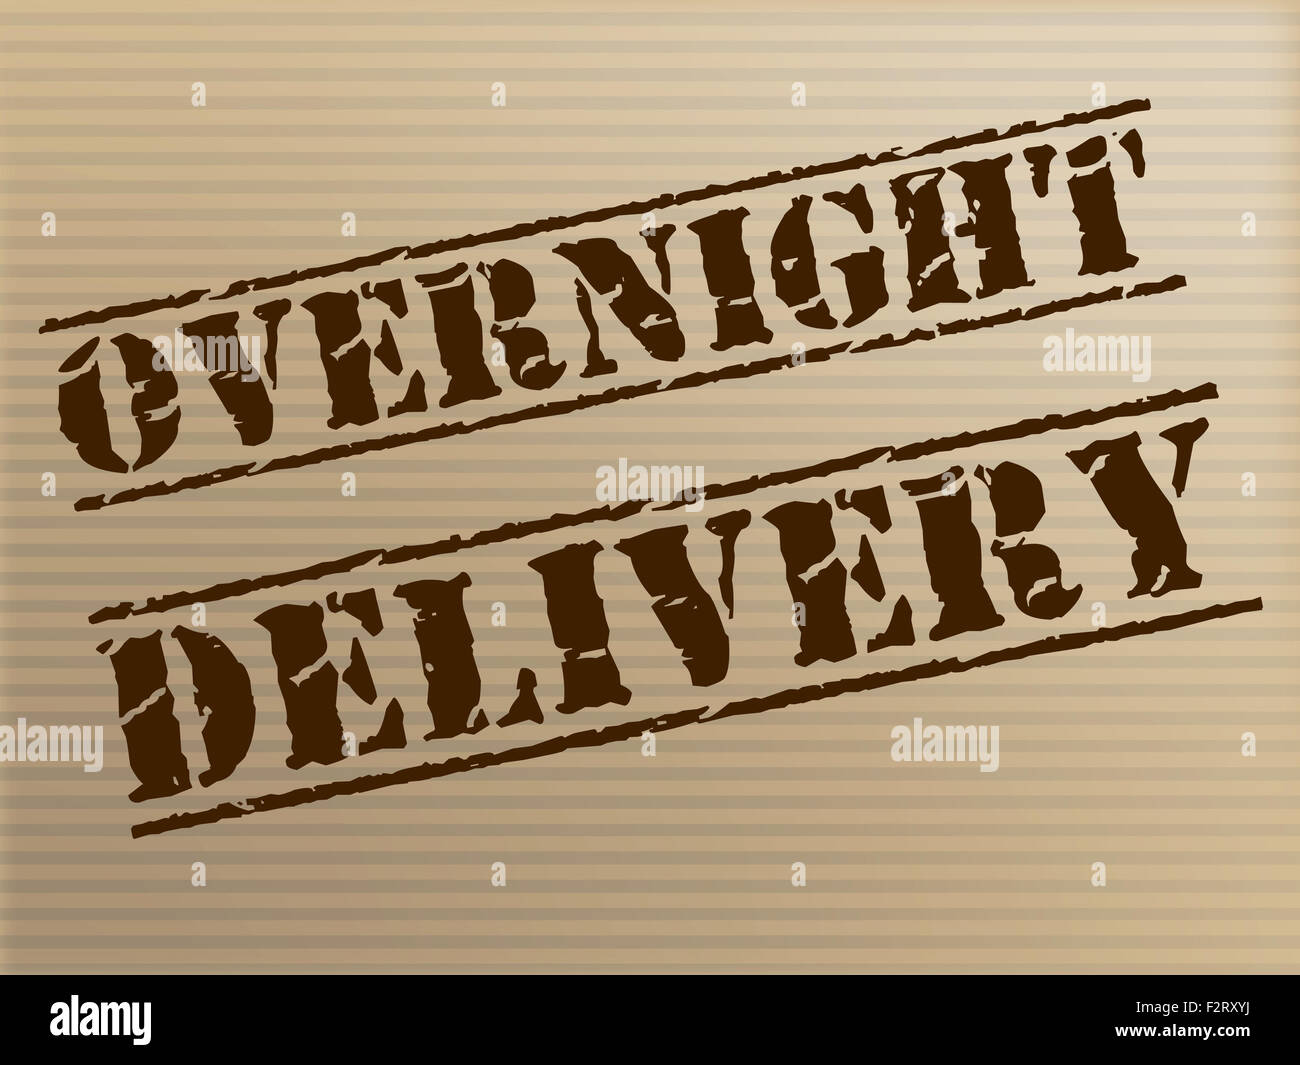 https://c8.alamy.com/comp/F2RXYJ/overnight-delivery-meaning-parcel-shipping-and-express-F2RXYJ.jpg